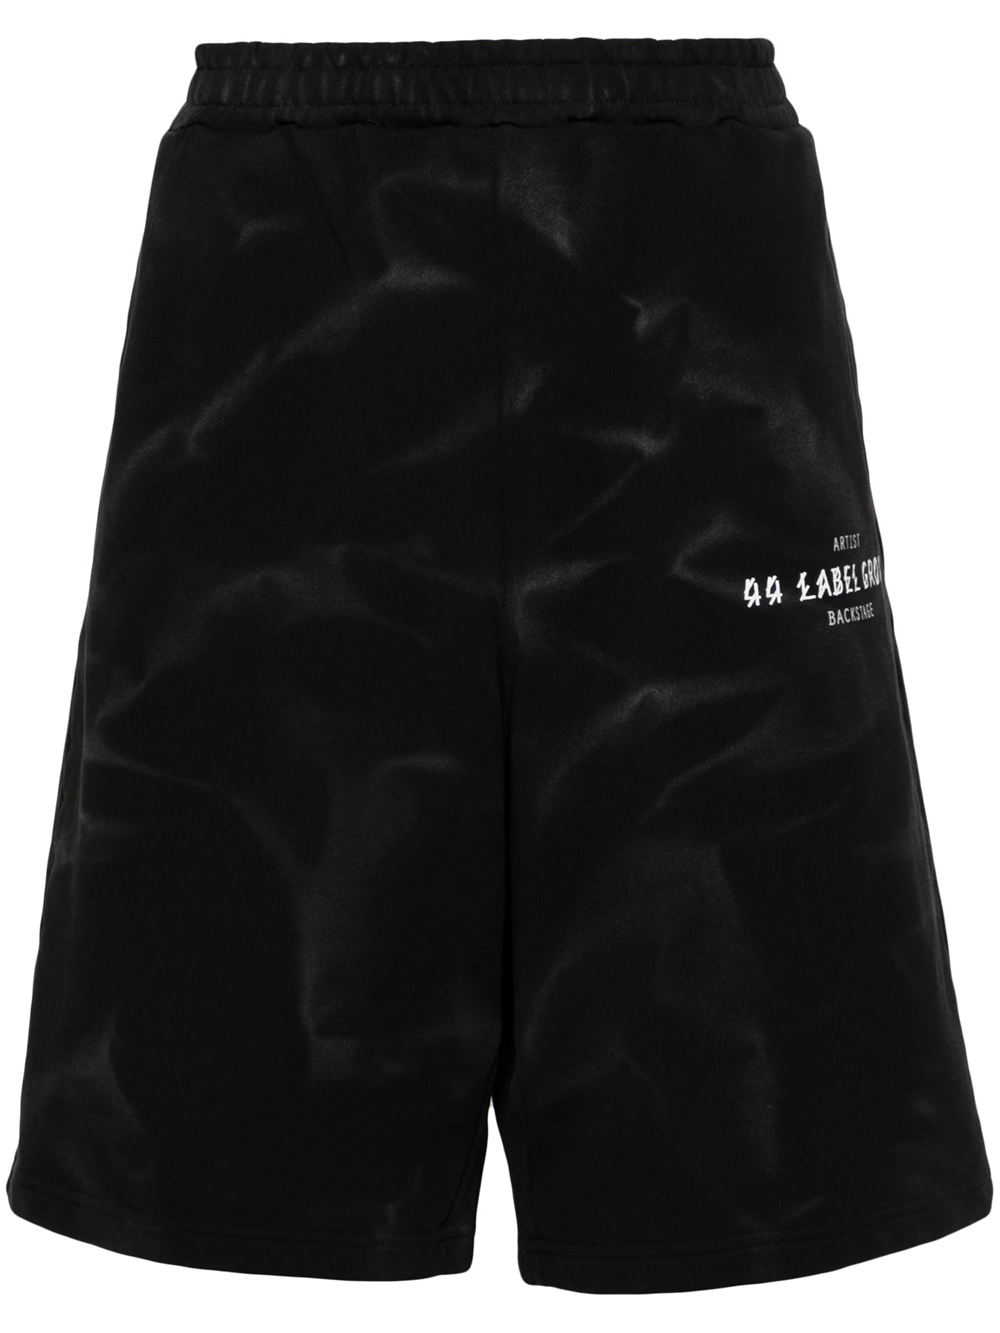 Shop 44 Label Group Shorts With Lightened Effect In Black